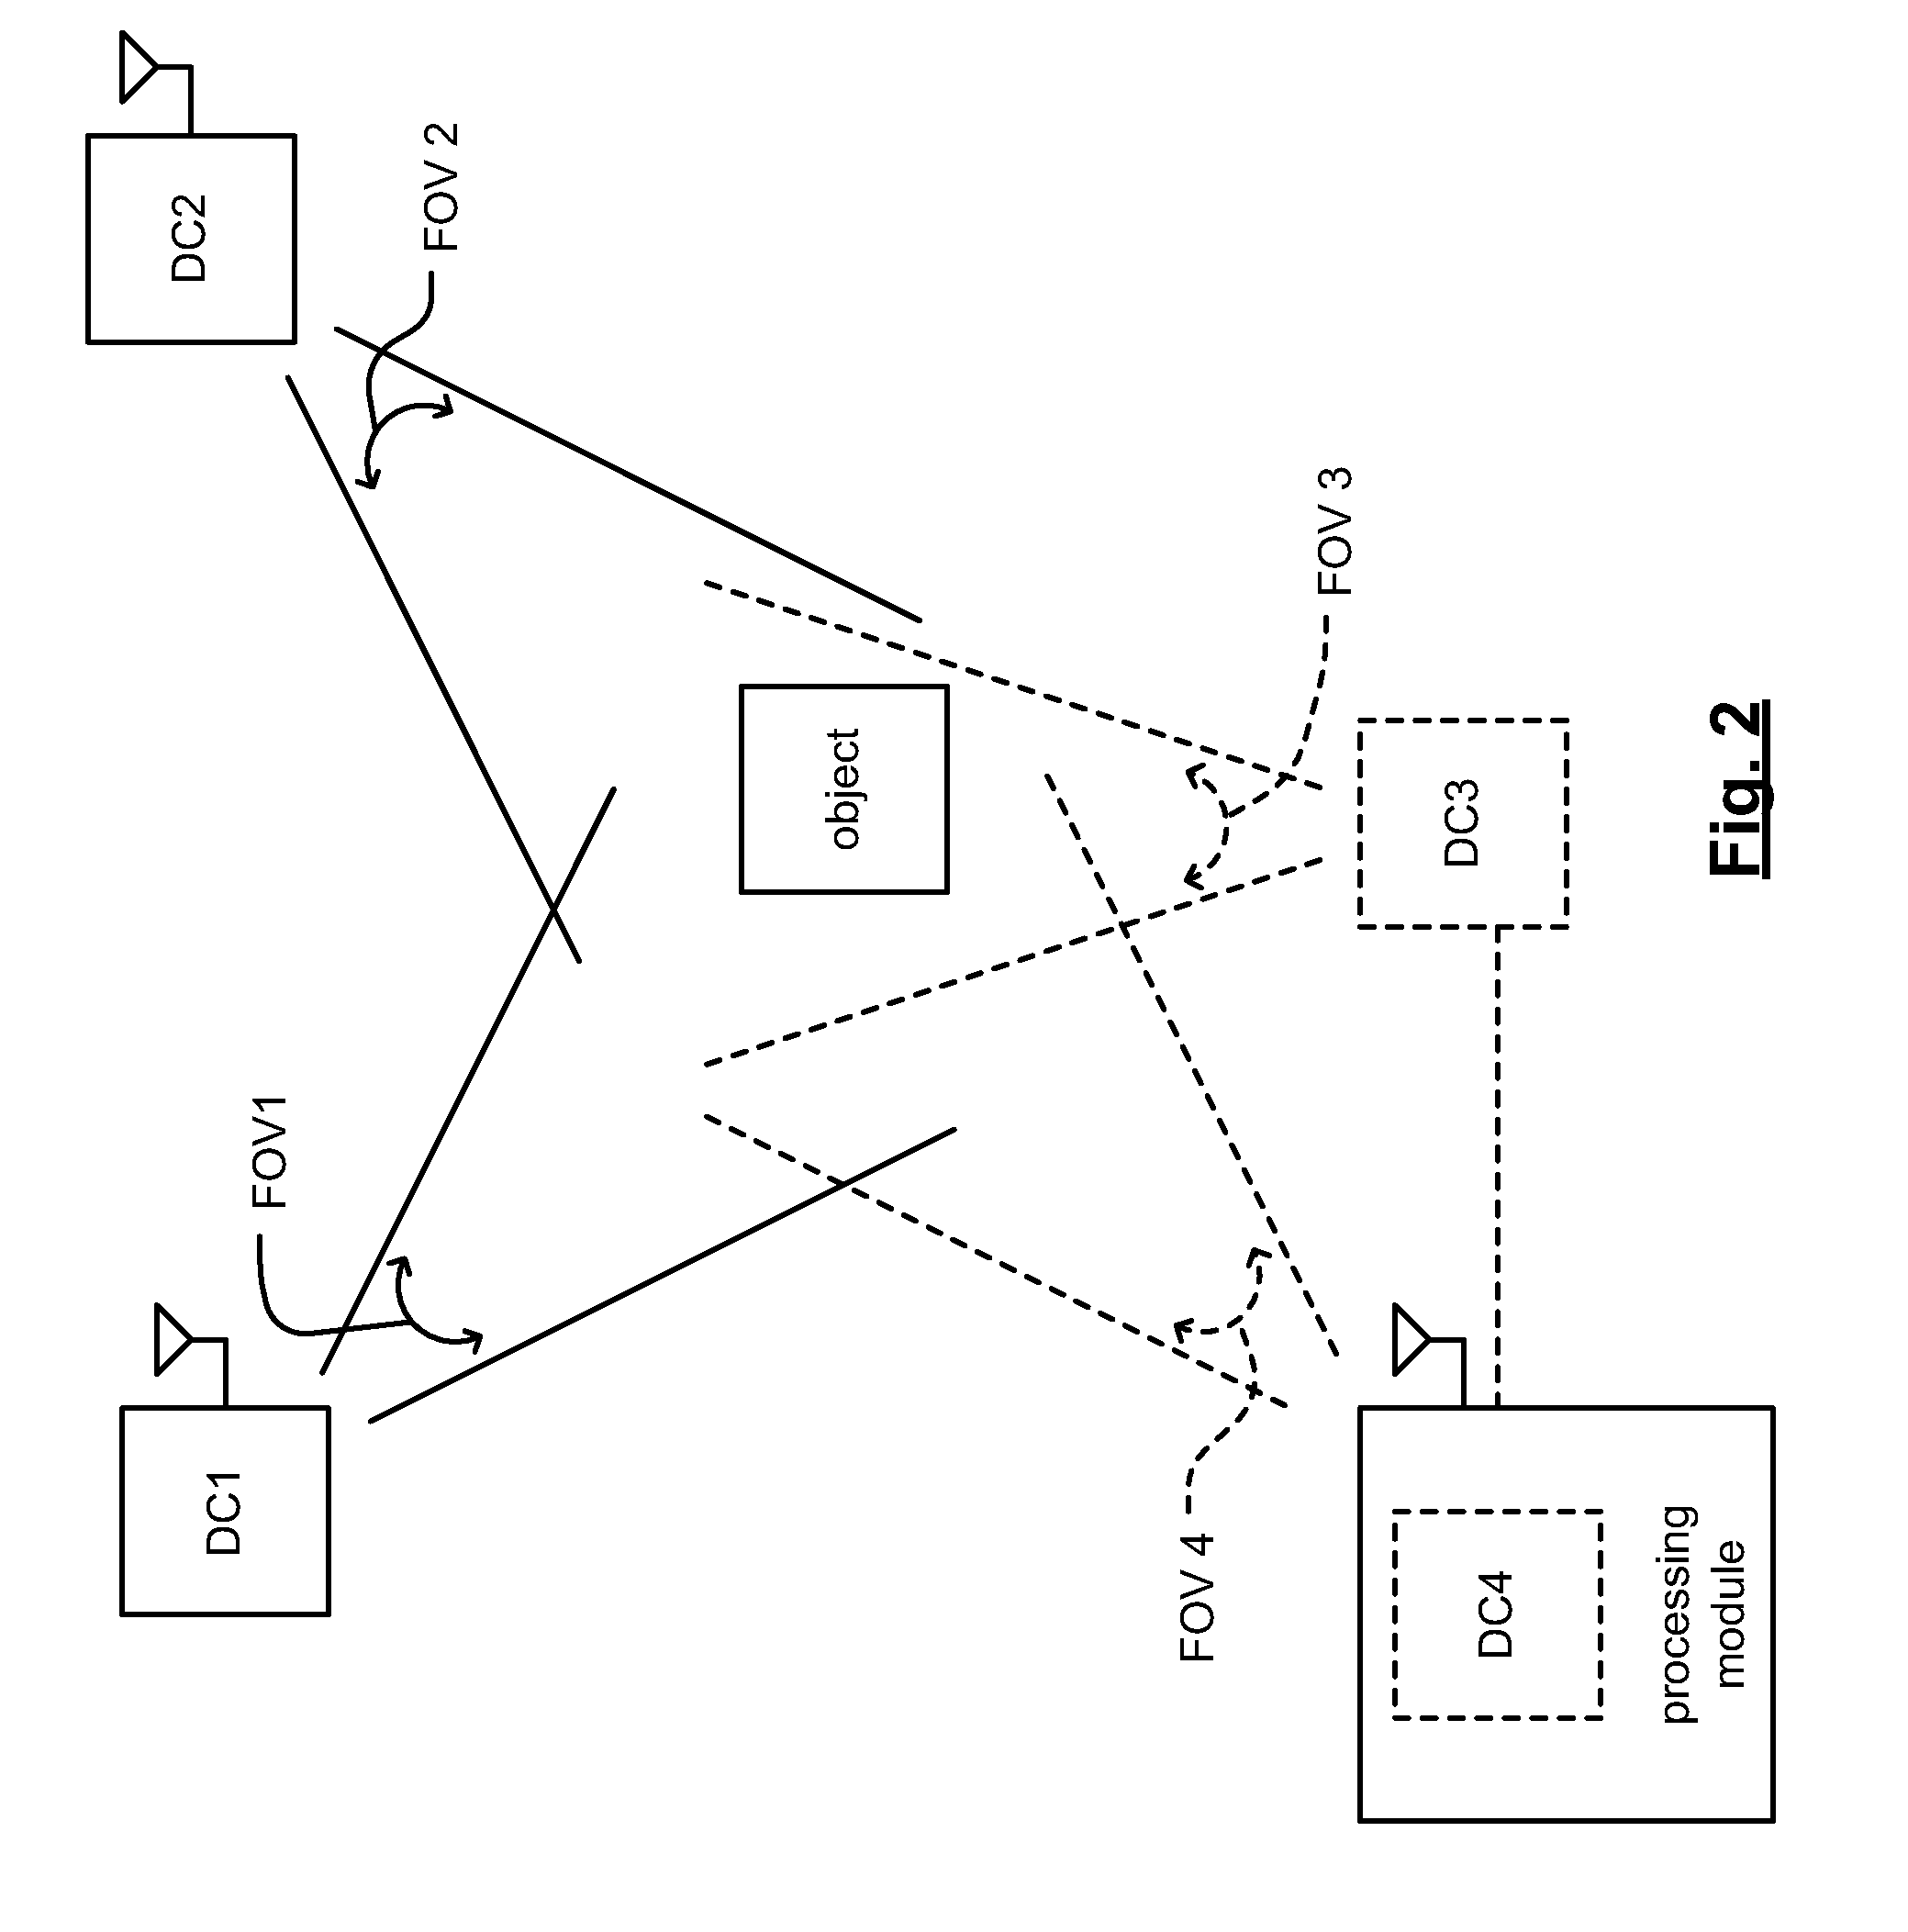 Position detection and/or movement tracking via image capture and processing